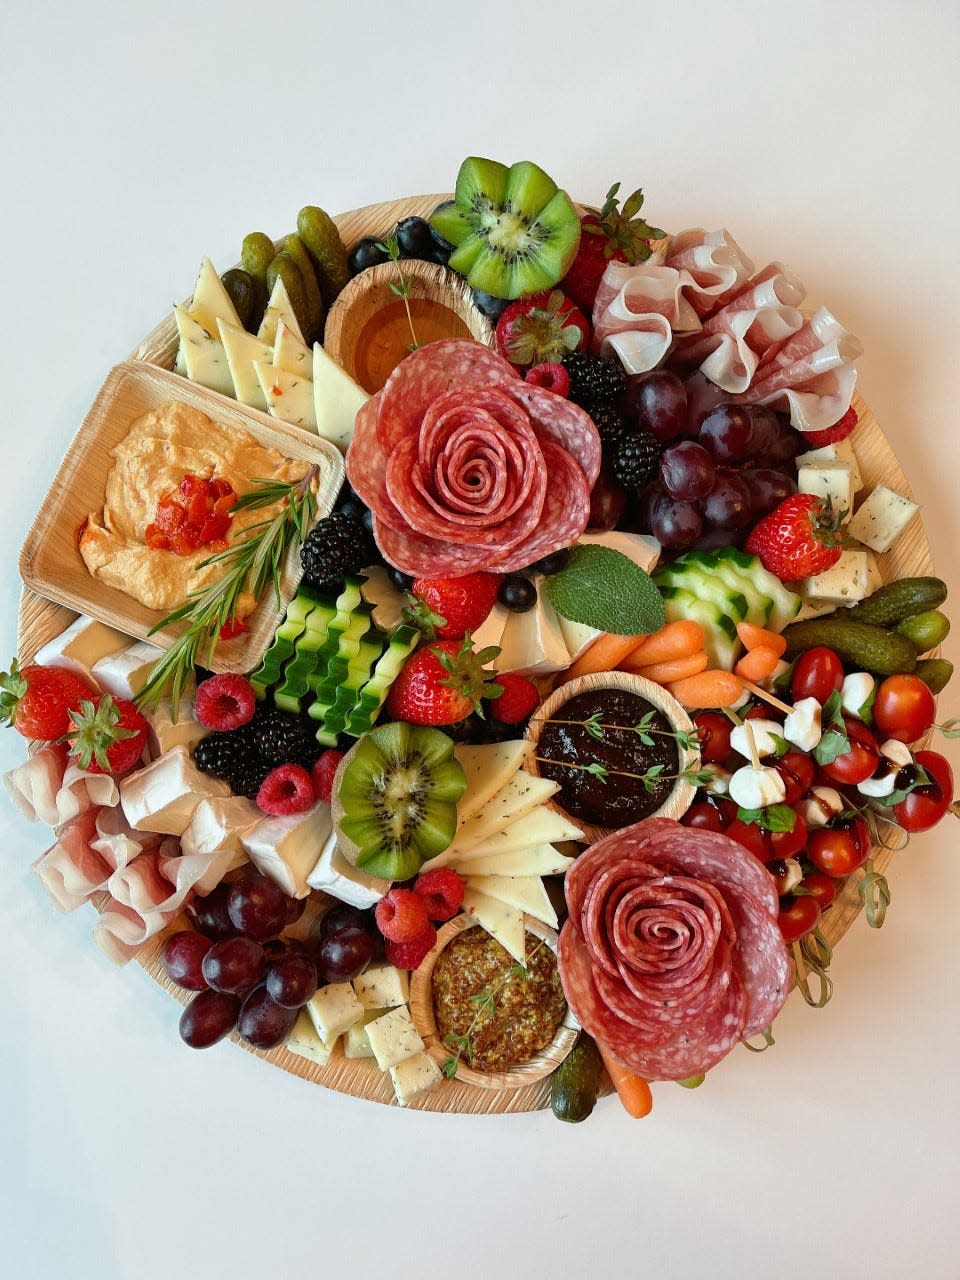 bites on a board specializes in charcuterie boards and other gourmet food items.